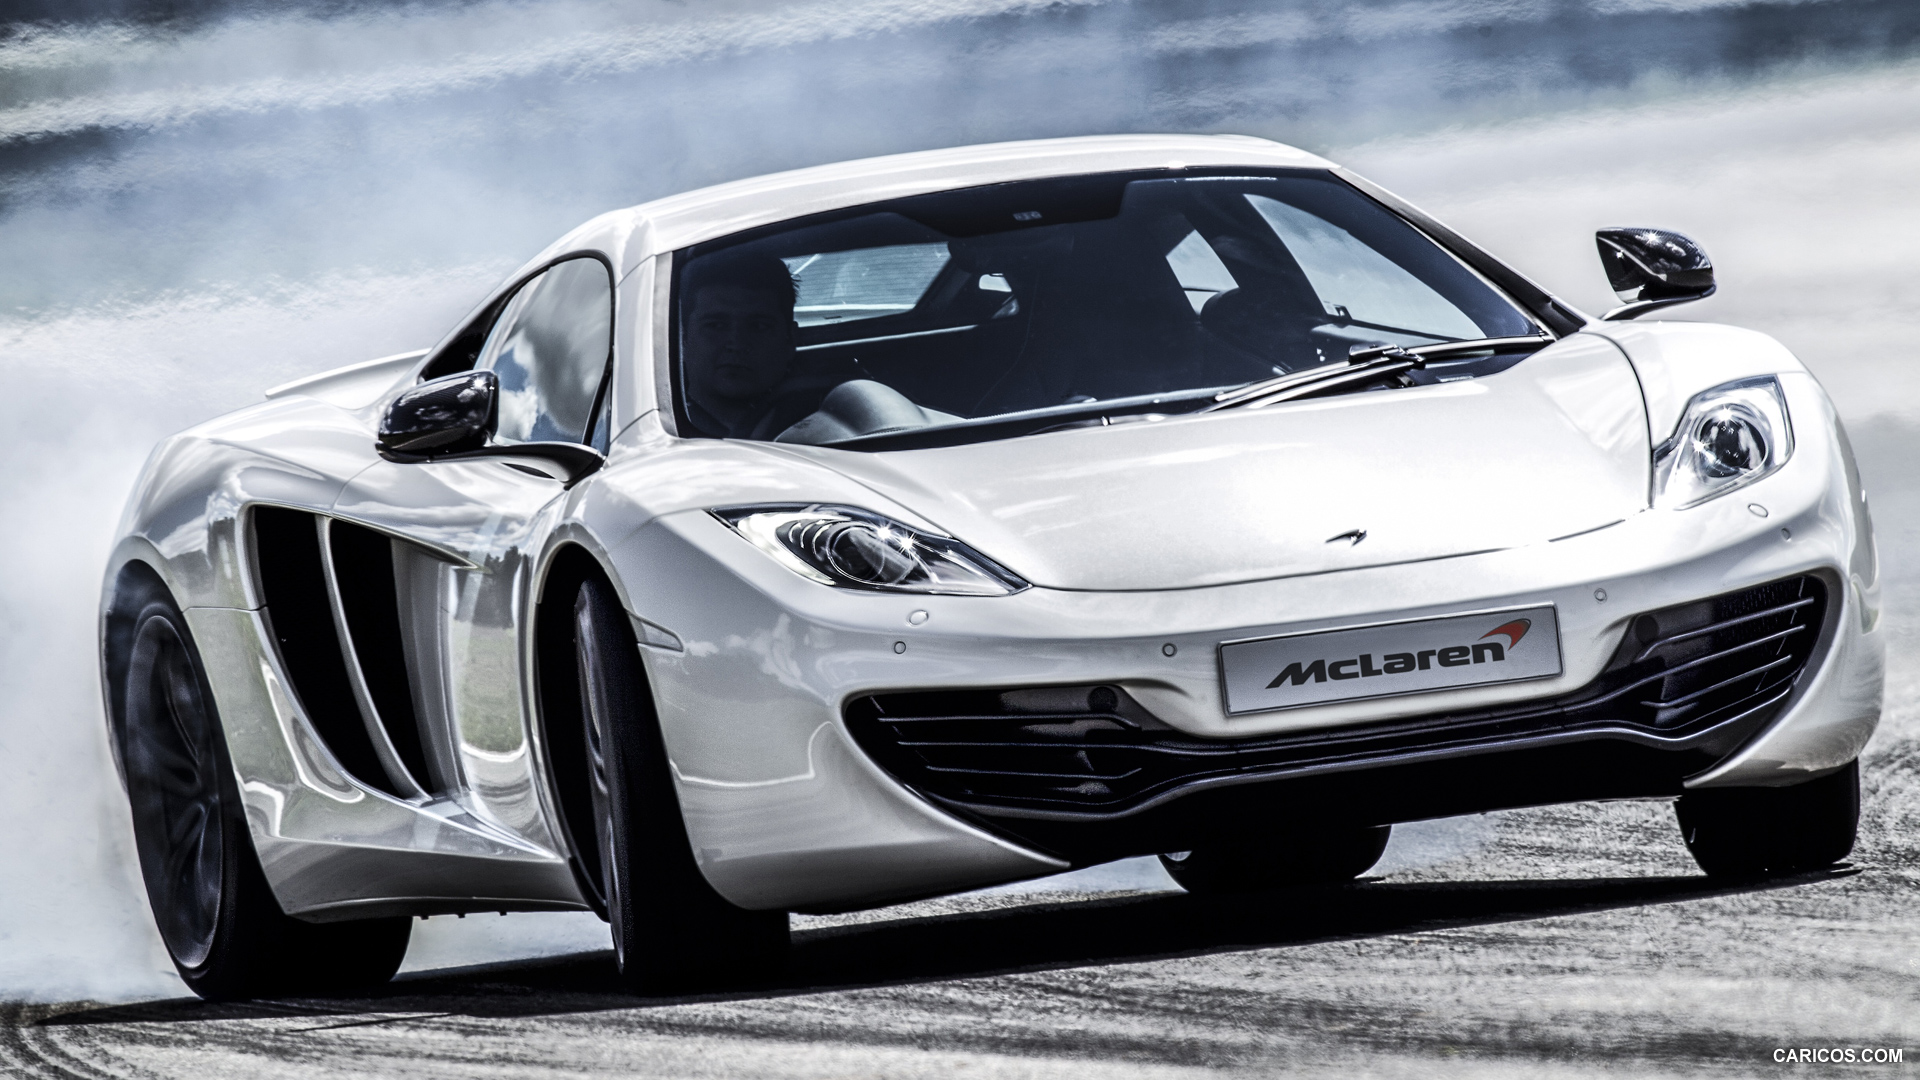 2013 McLaren MP4-12C On Track - Front, #2 of 7